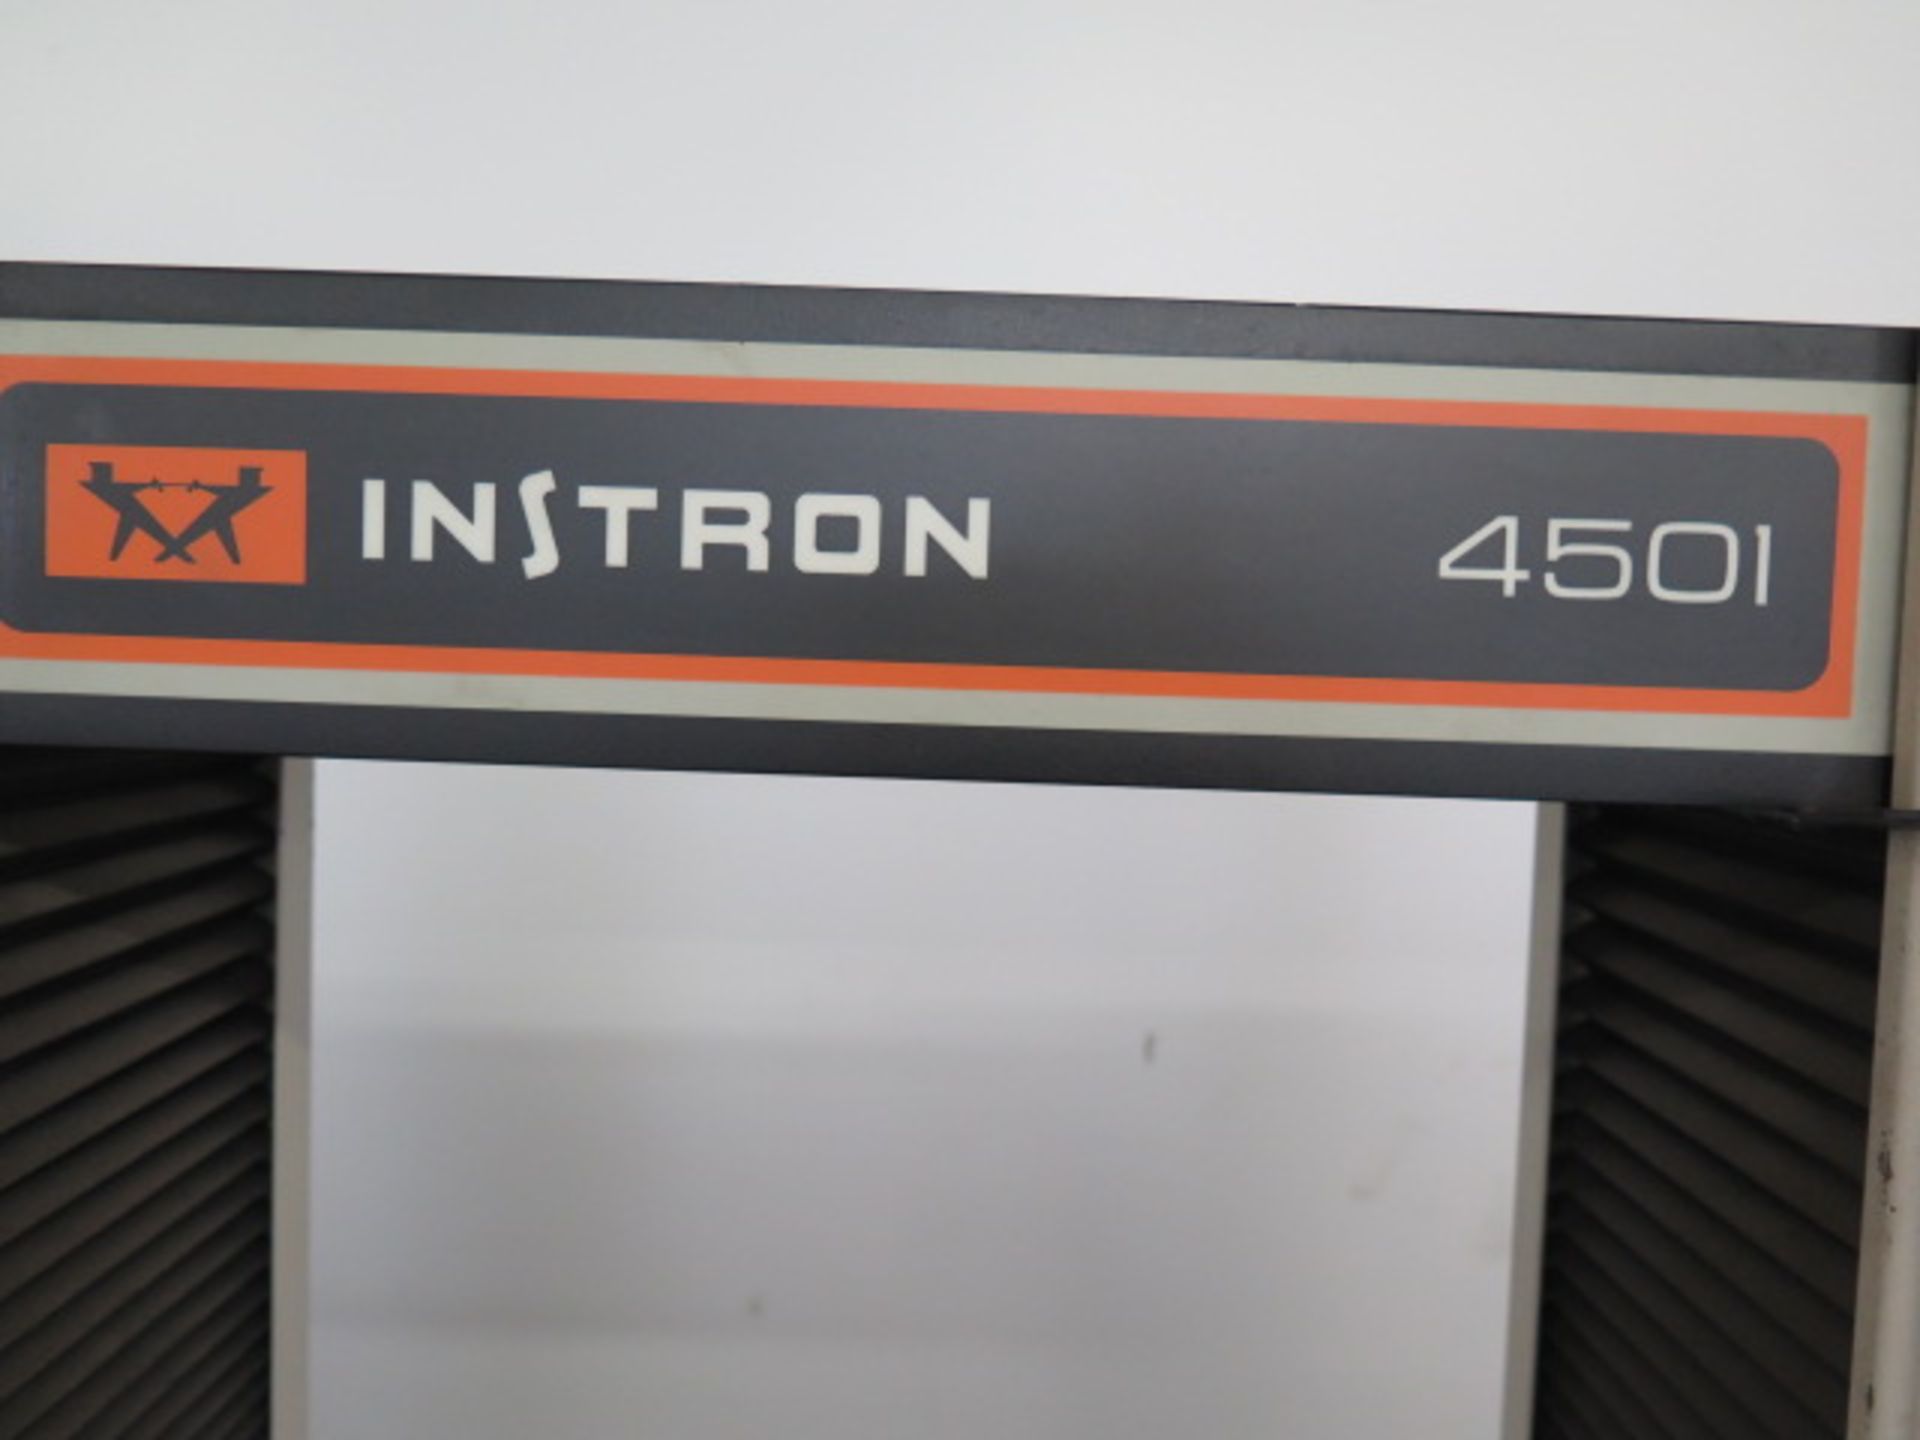 Instron 4501 Tensile Tester s/n H3105 w/ Digital Controls, Heat Wave Test Chamber (Oven) - Image 7 of 8